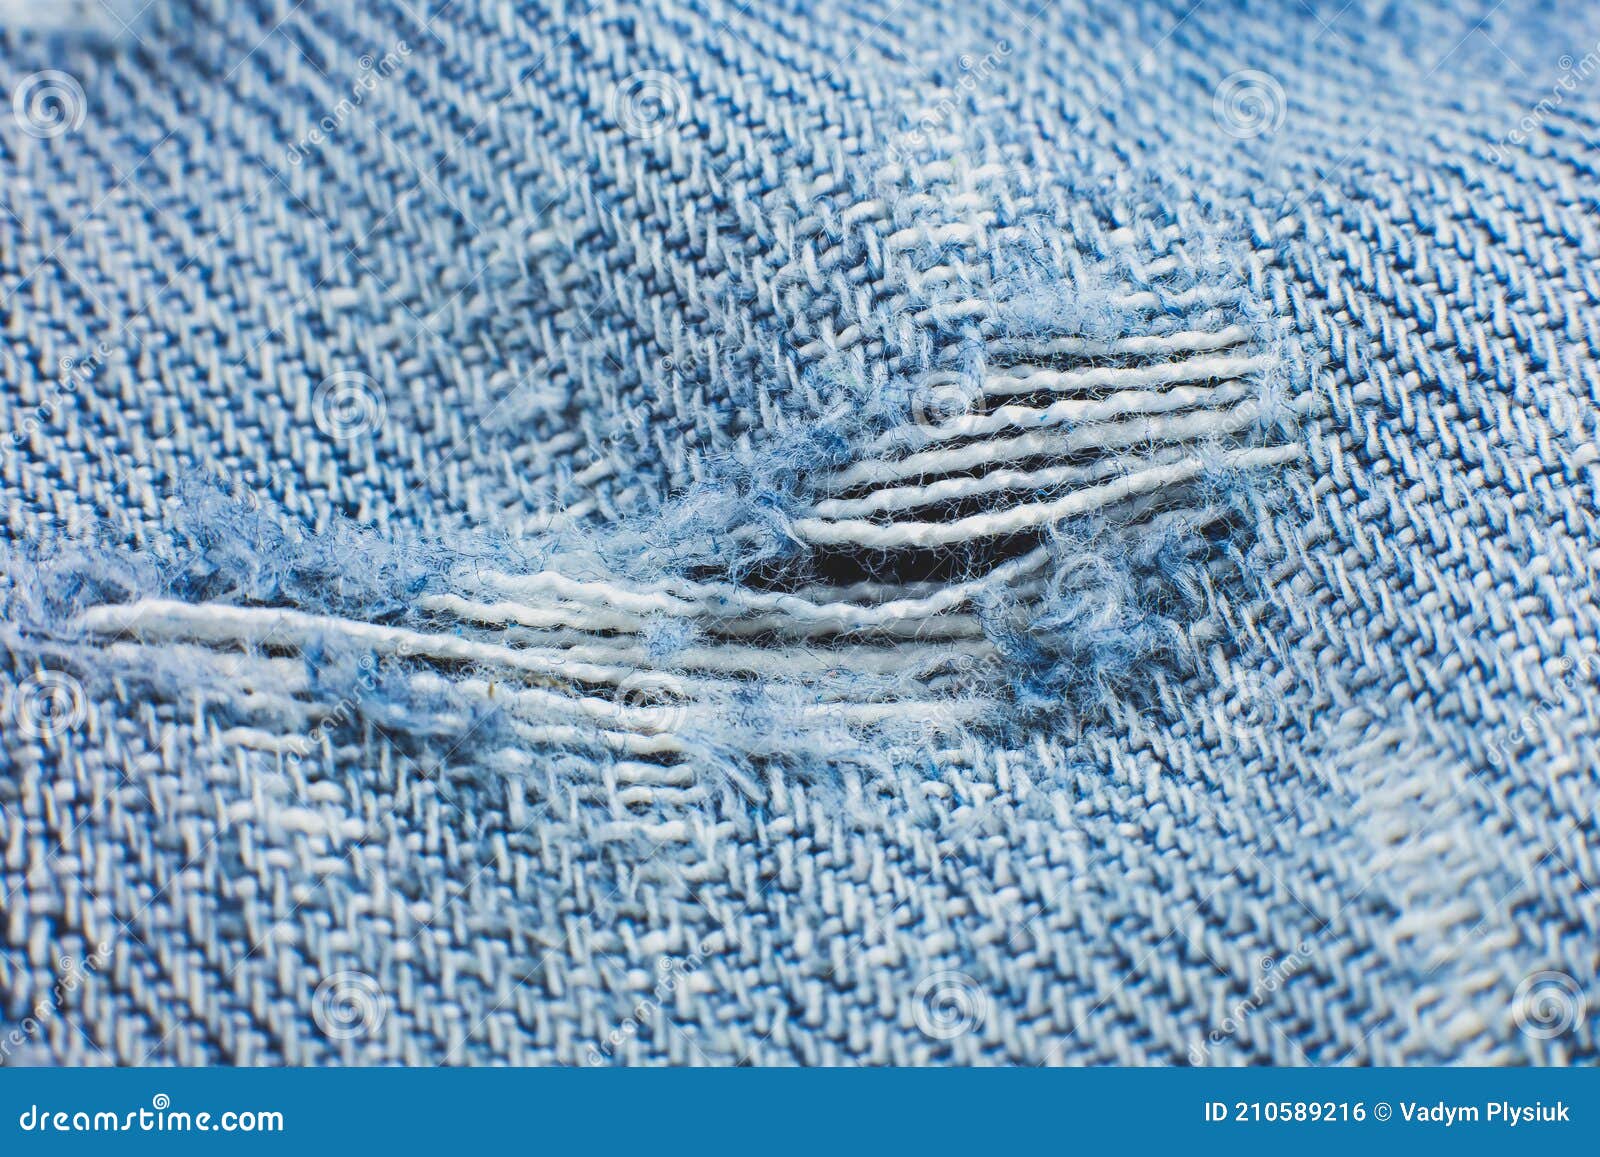 Ripped Blue Hipster Jeans Material. Destroyed Denim Cloth Texture Stock ...